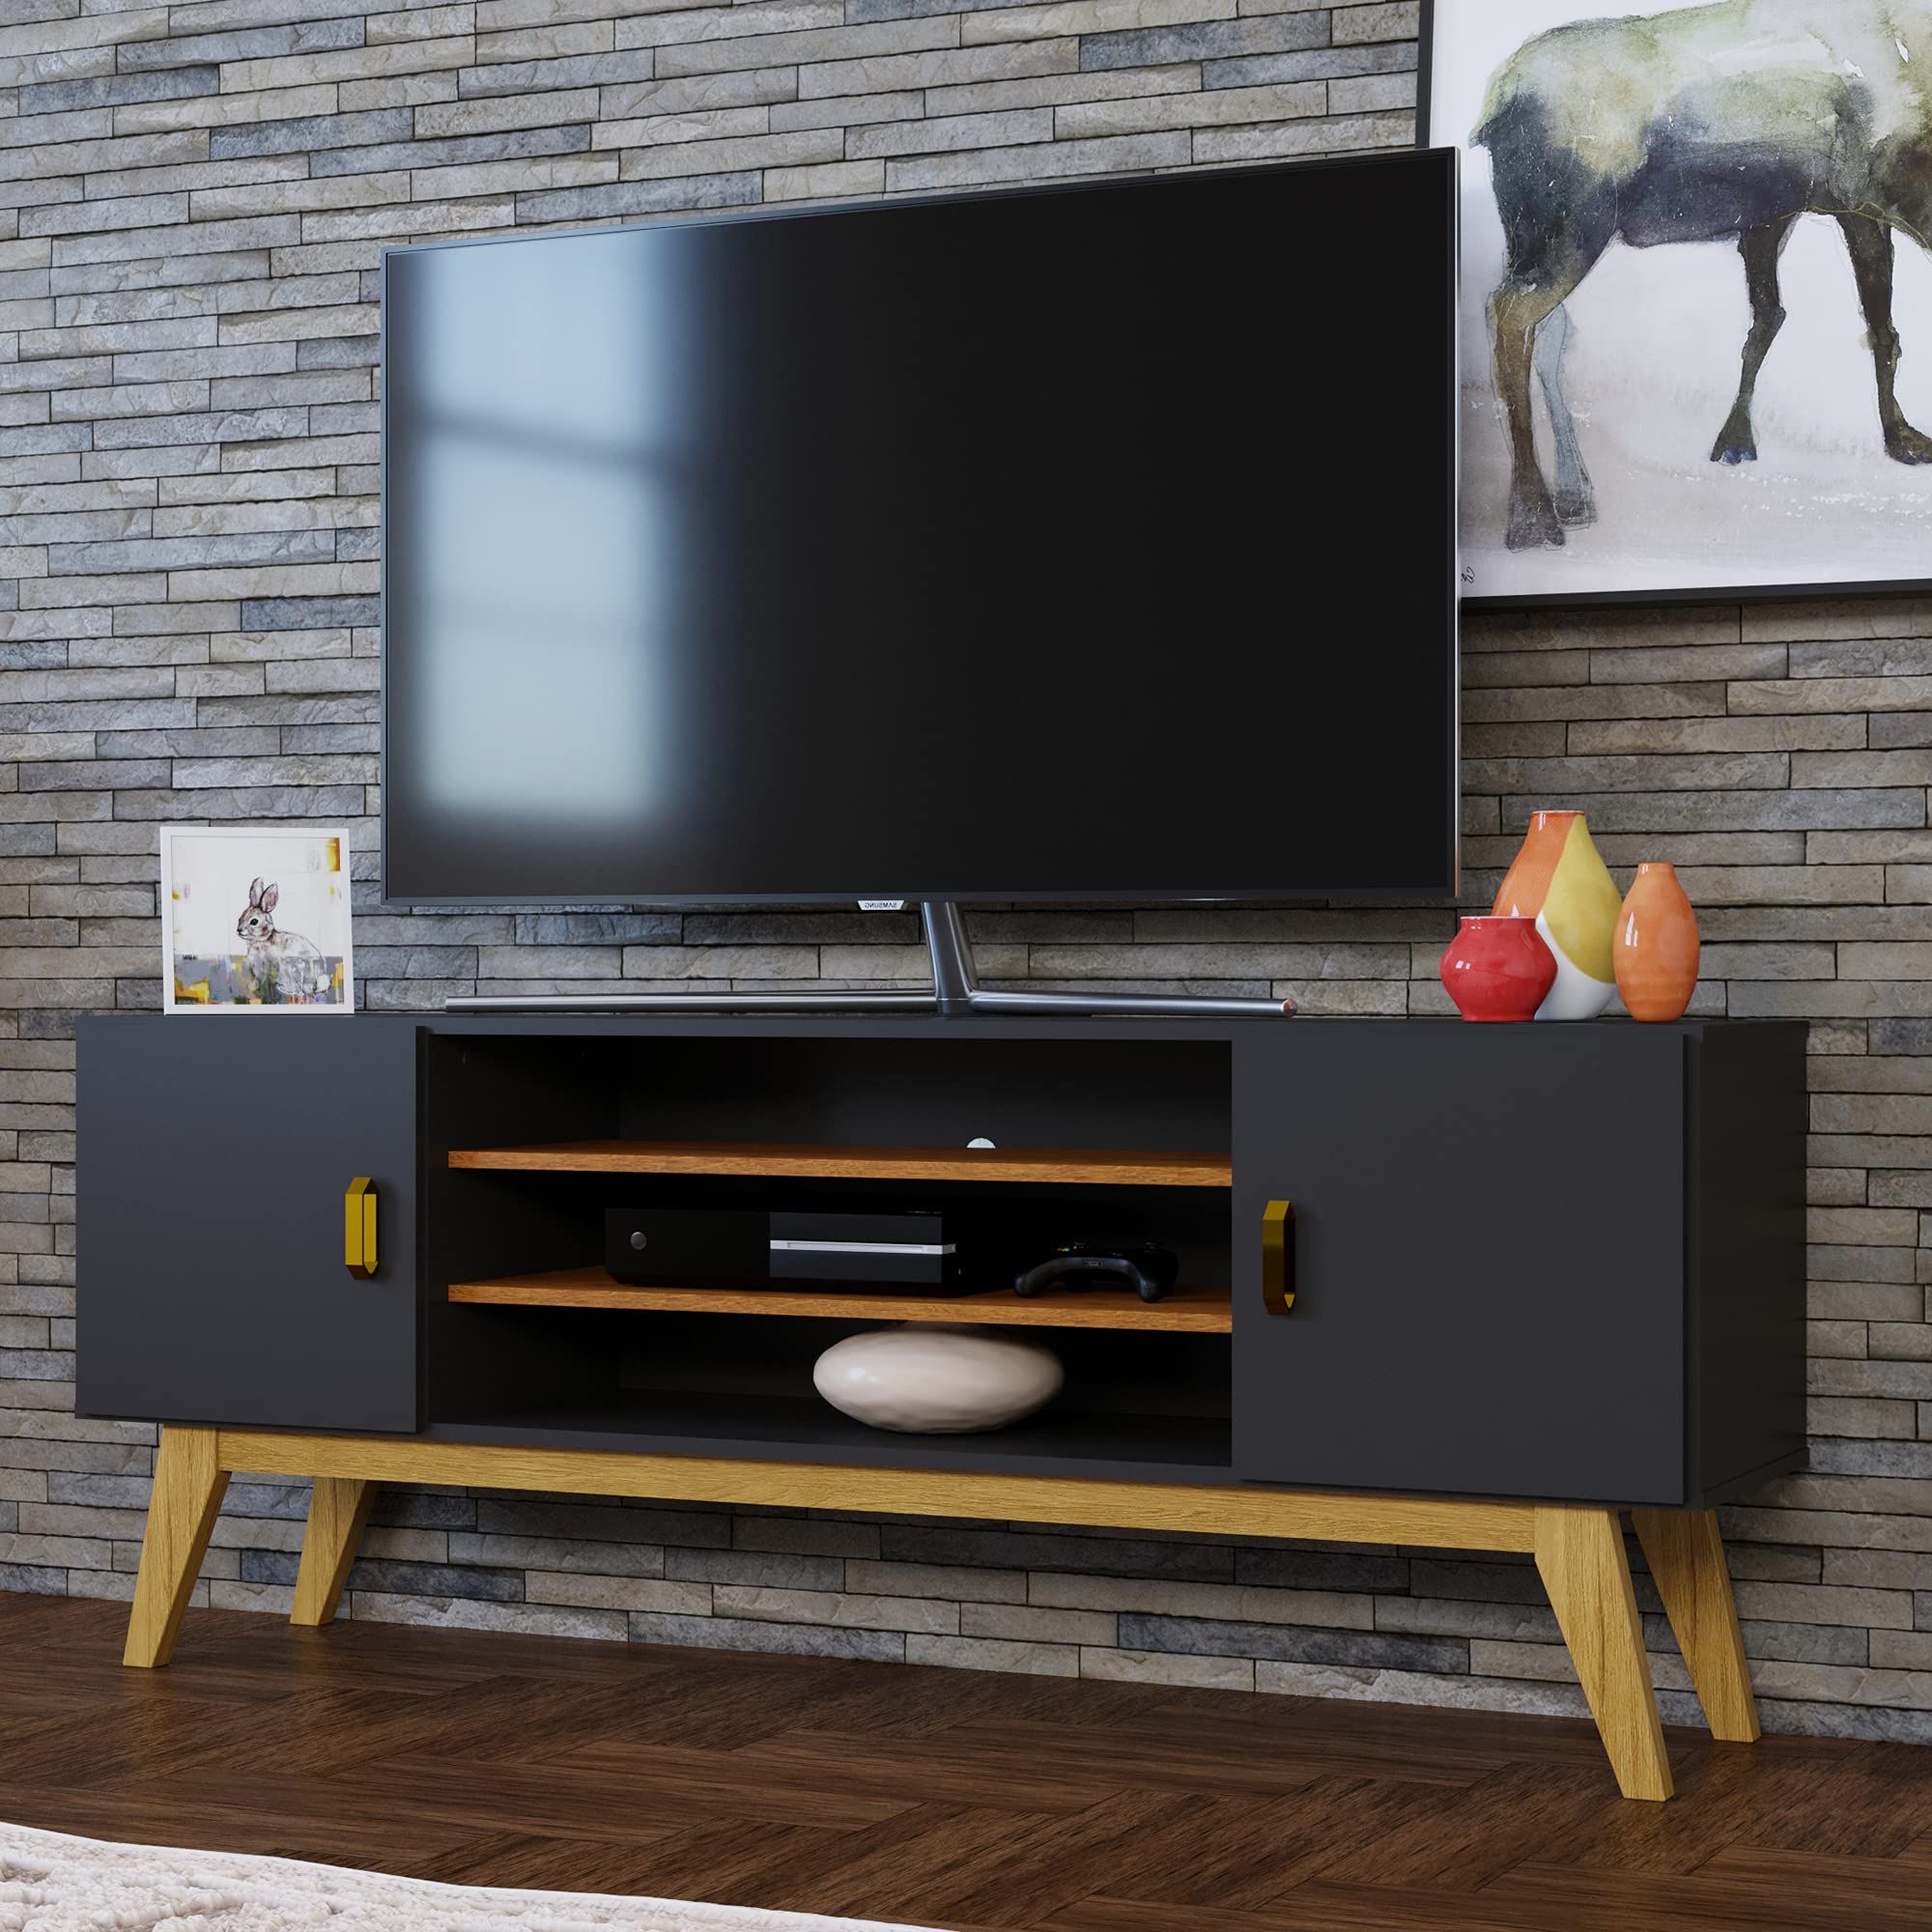 Matte Tv Stands Pertaining To Most Recent Amazon: Boahaus Atlanta Black Matte Tv Stand, Tvs Up To 58",  Manufactured Wood : Home & Kitchen (View 3 of 10)